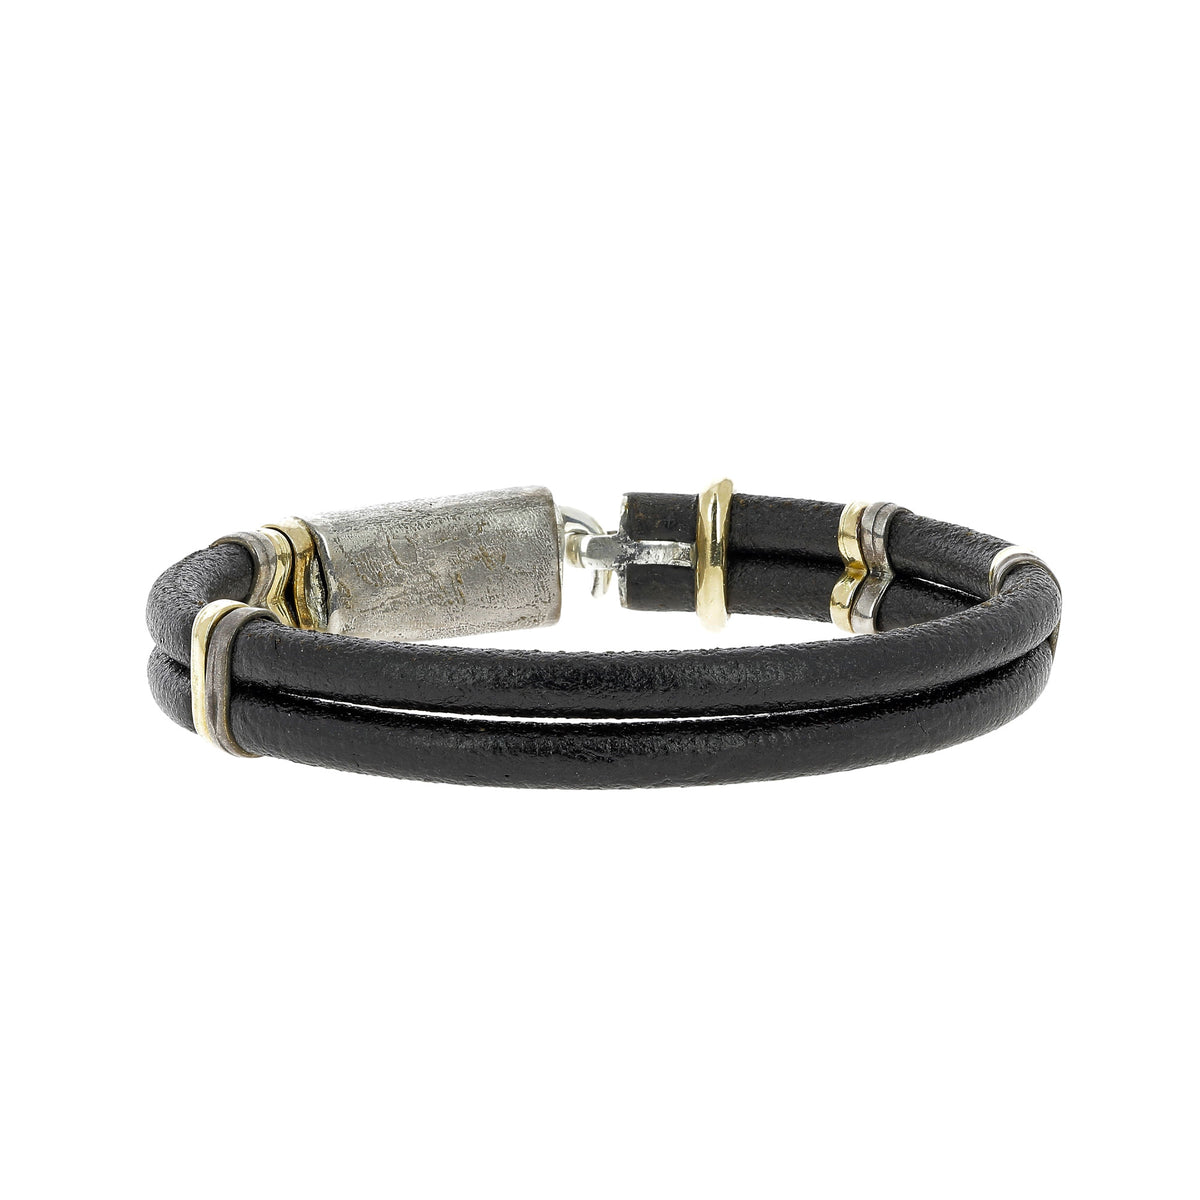 Misani 5mm Leather with Gold & Silver Armband